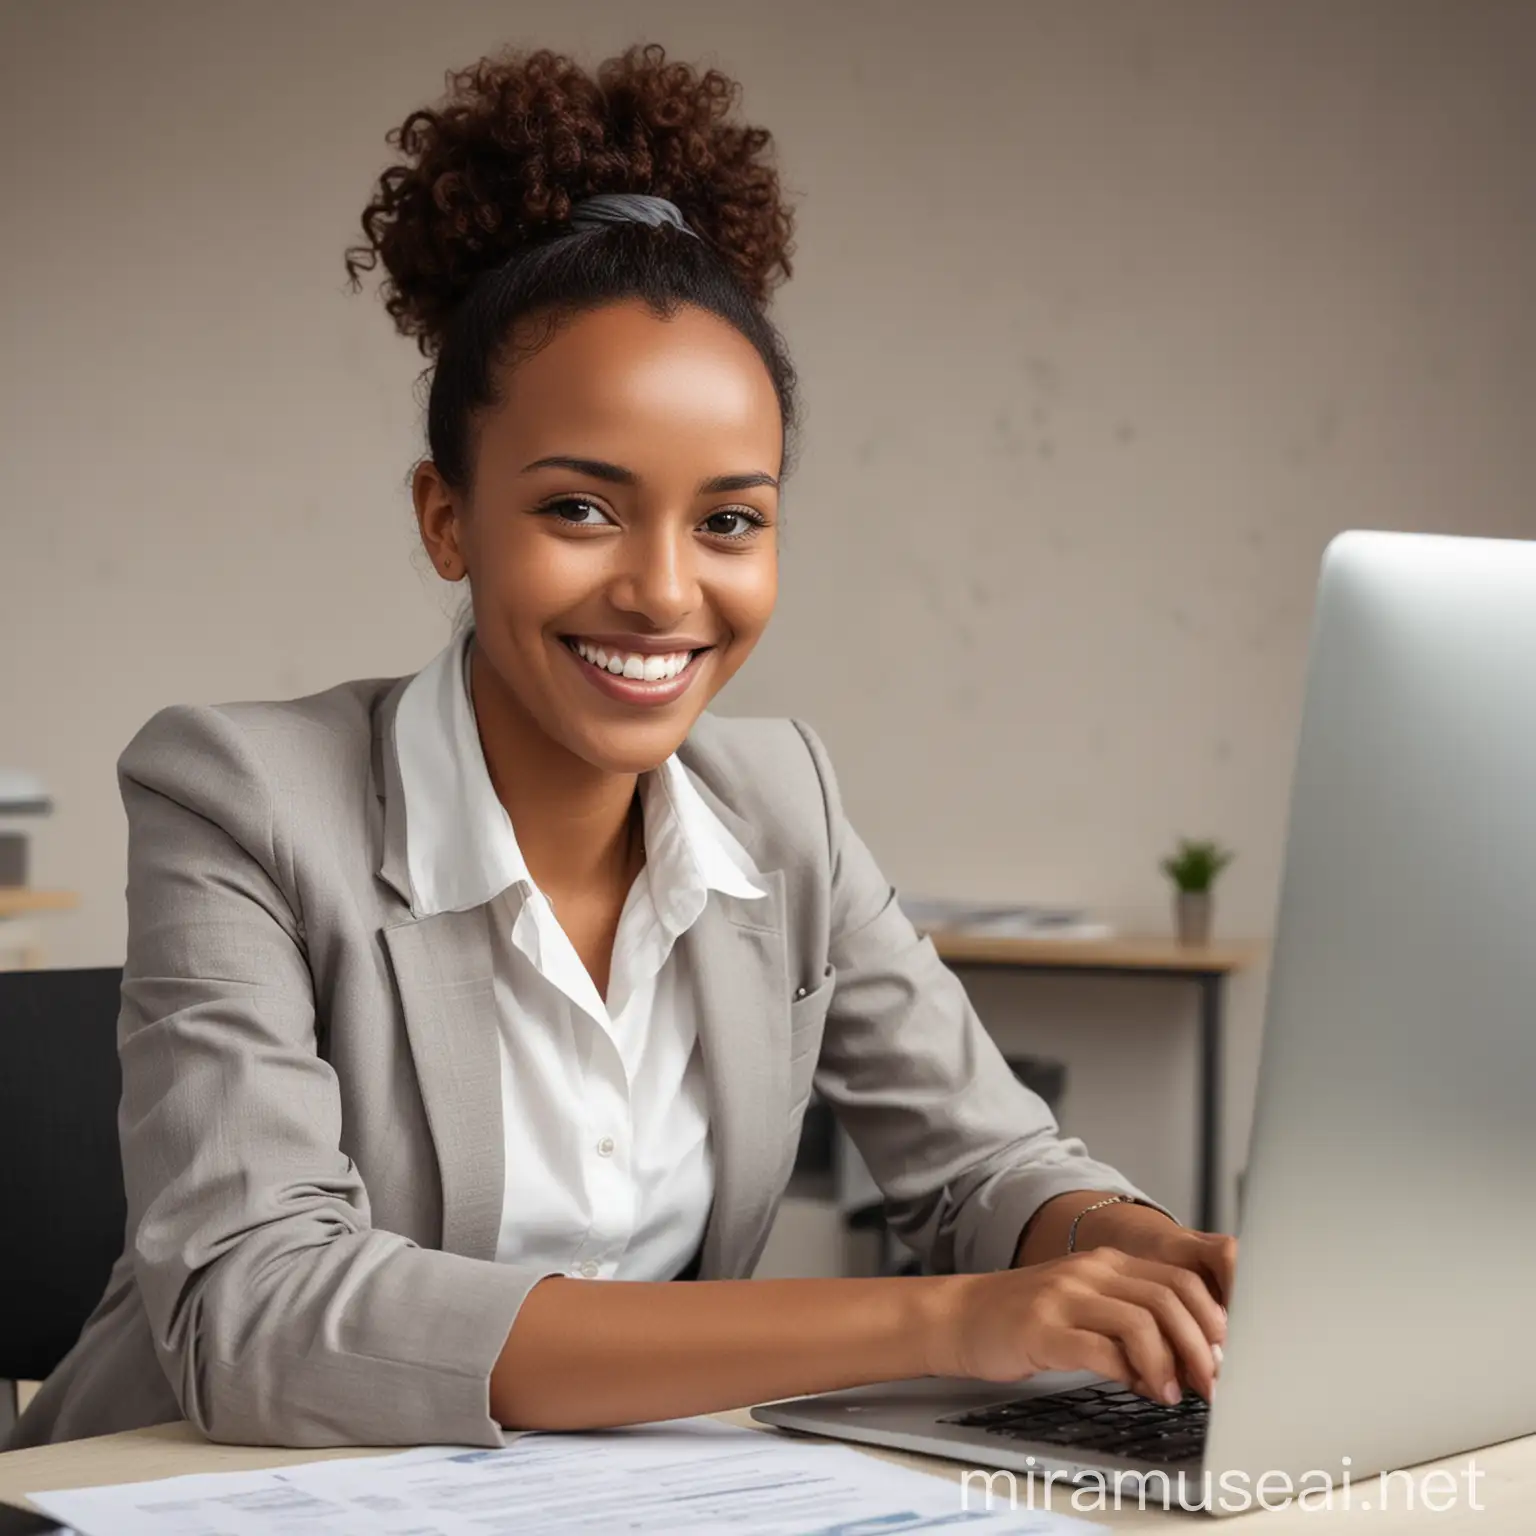 Ethiopian HR Recruiter Smiling at Computer While Reviewing Applicants CVs